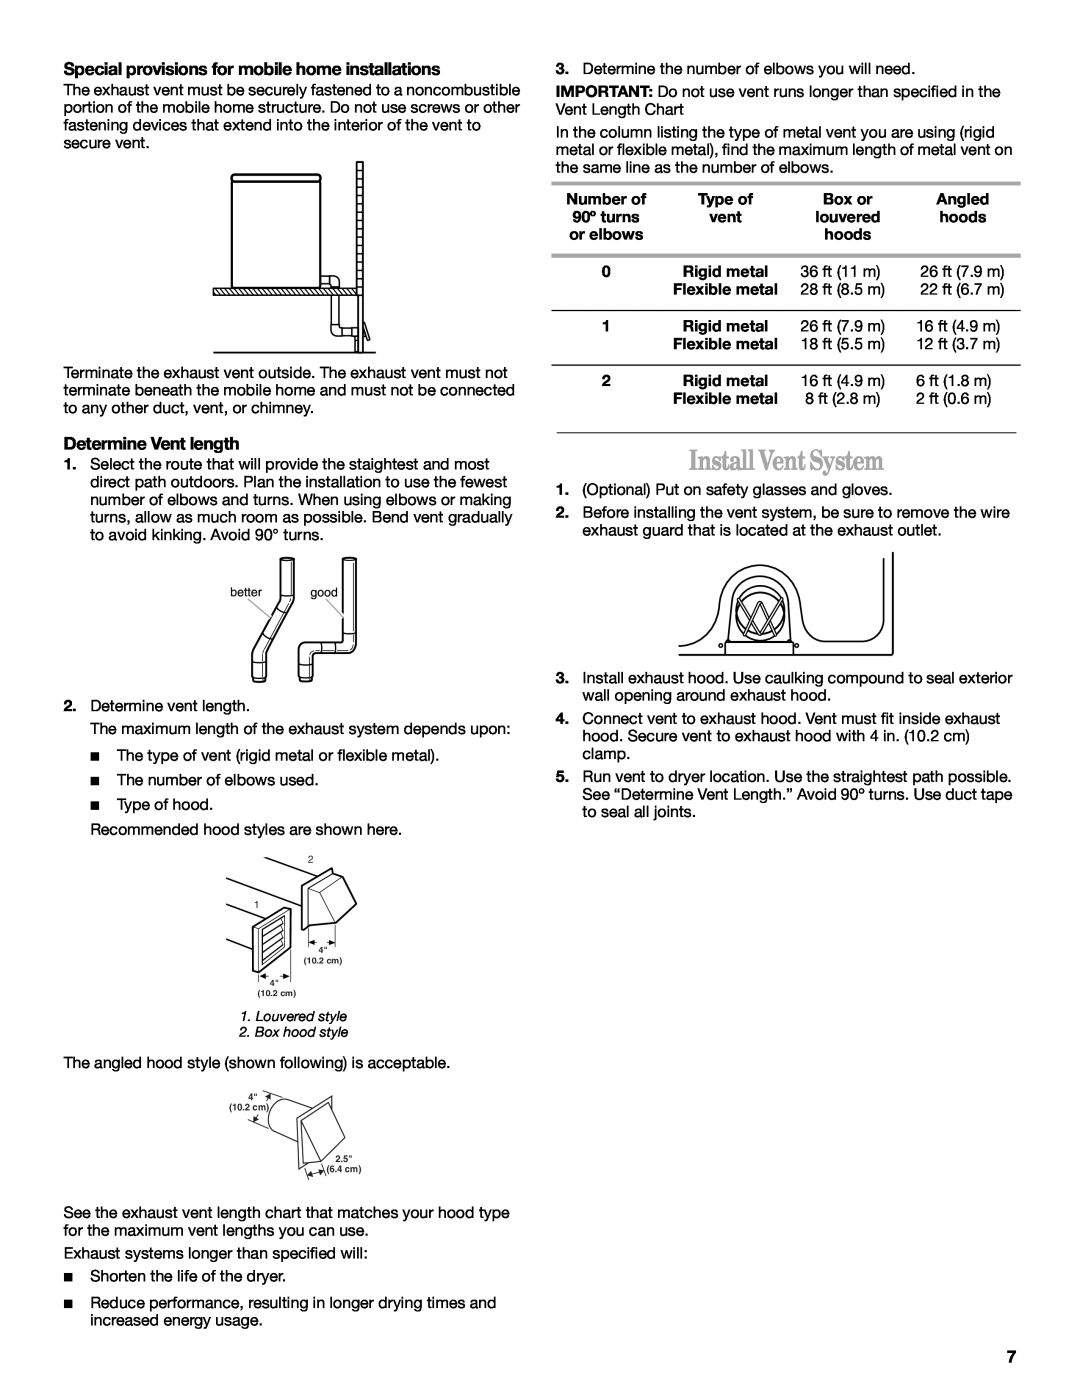 Whirlpool 3406879 manual Install Vent System, Special provisions for mobile home installations, Determine Vent length 